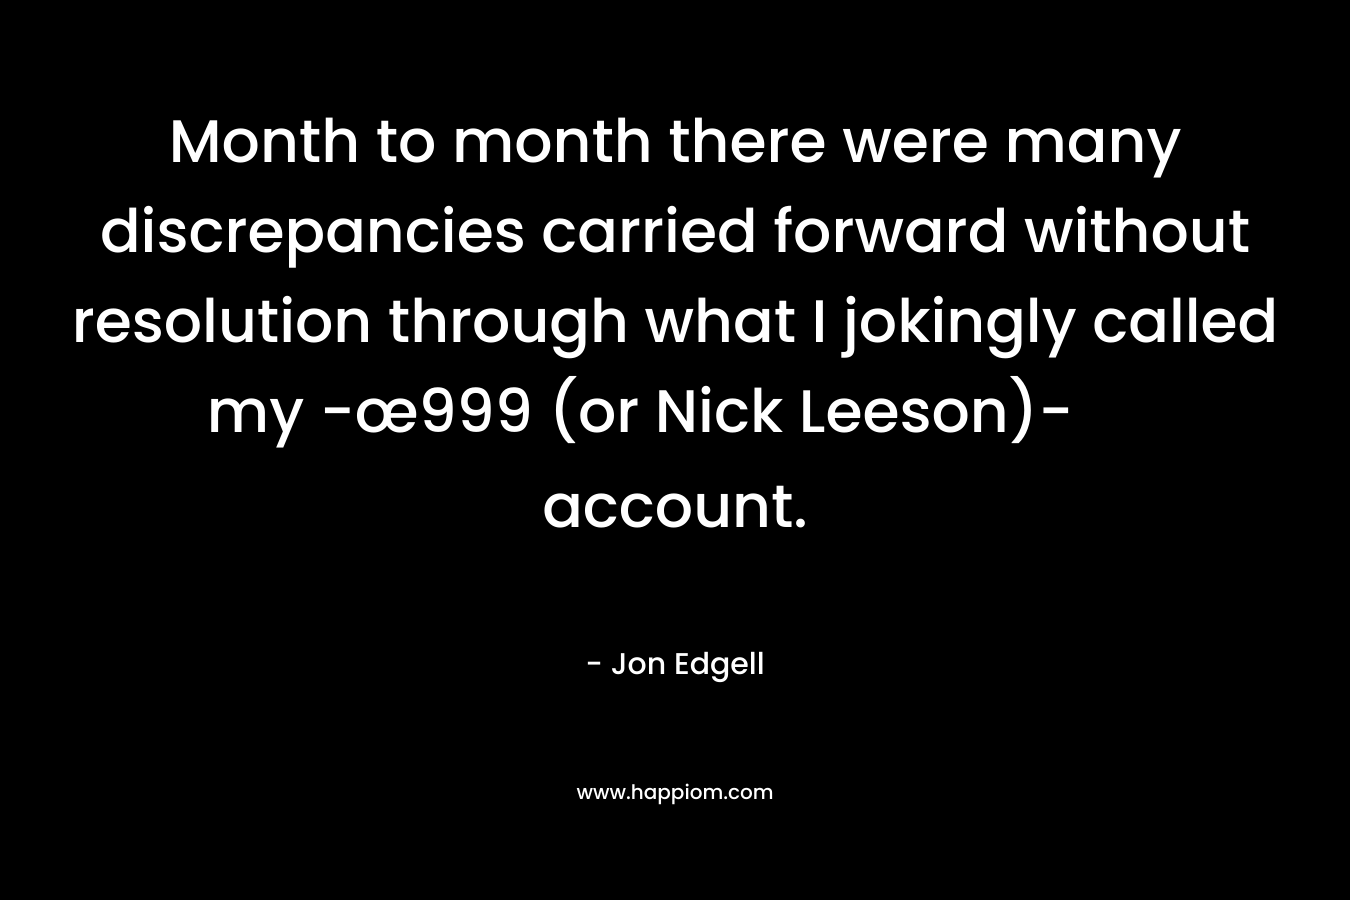 Month to month there were many discrepancies carried forward without resolution through what I jokingly called my -œ999 (or Nick Leeson)- account. – Jon Edgell